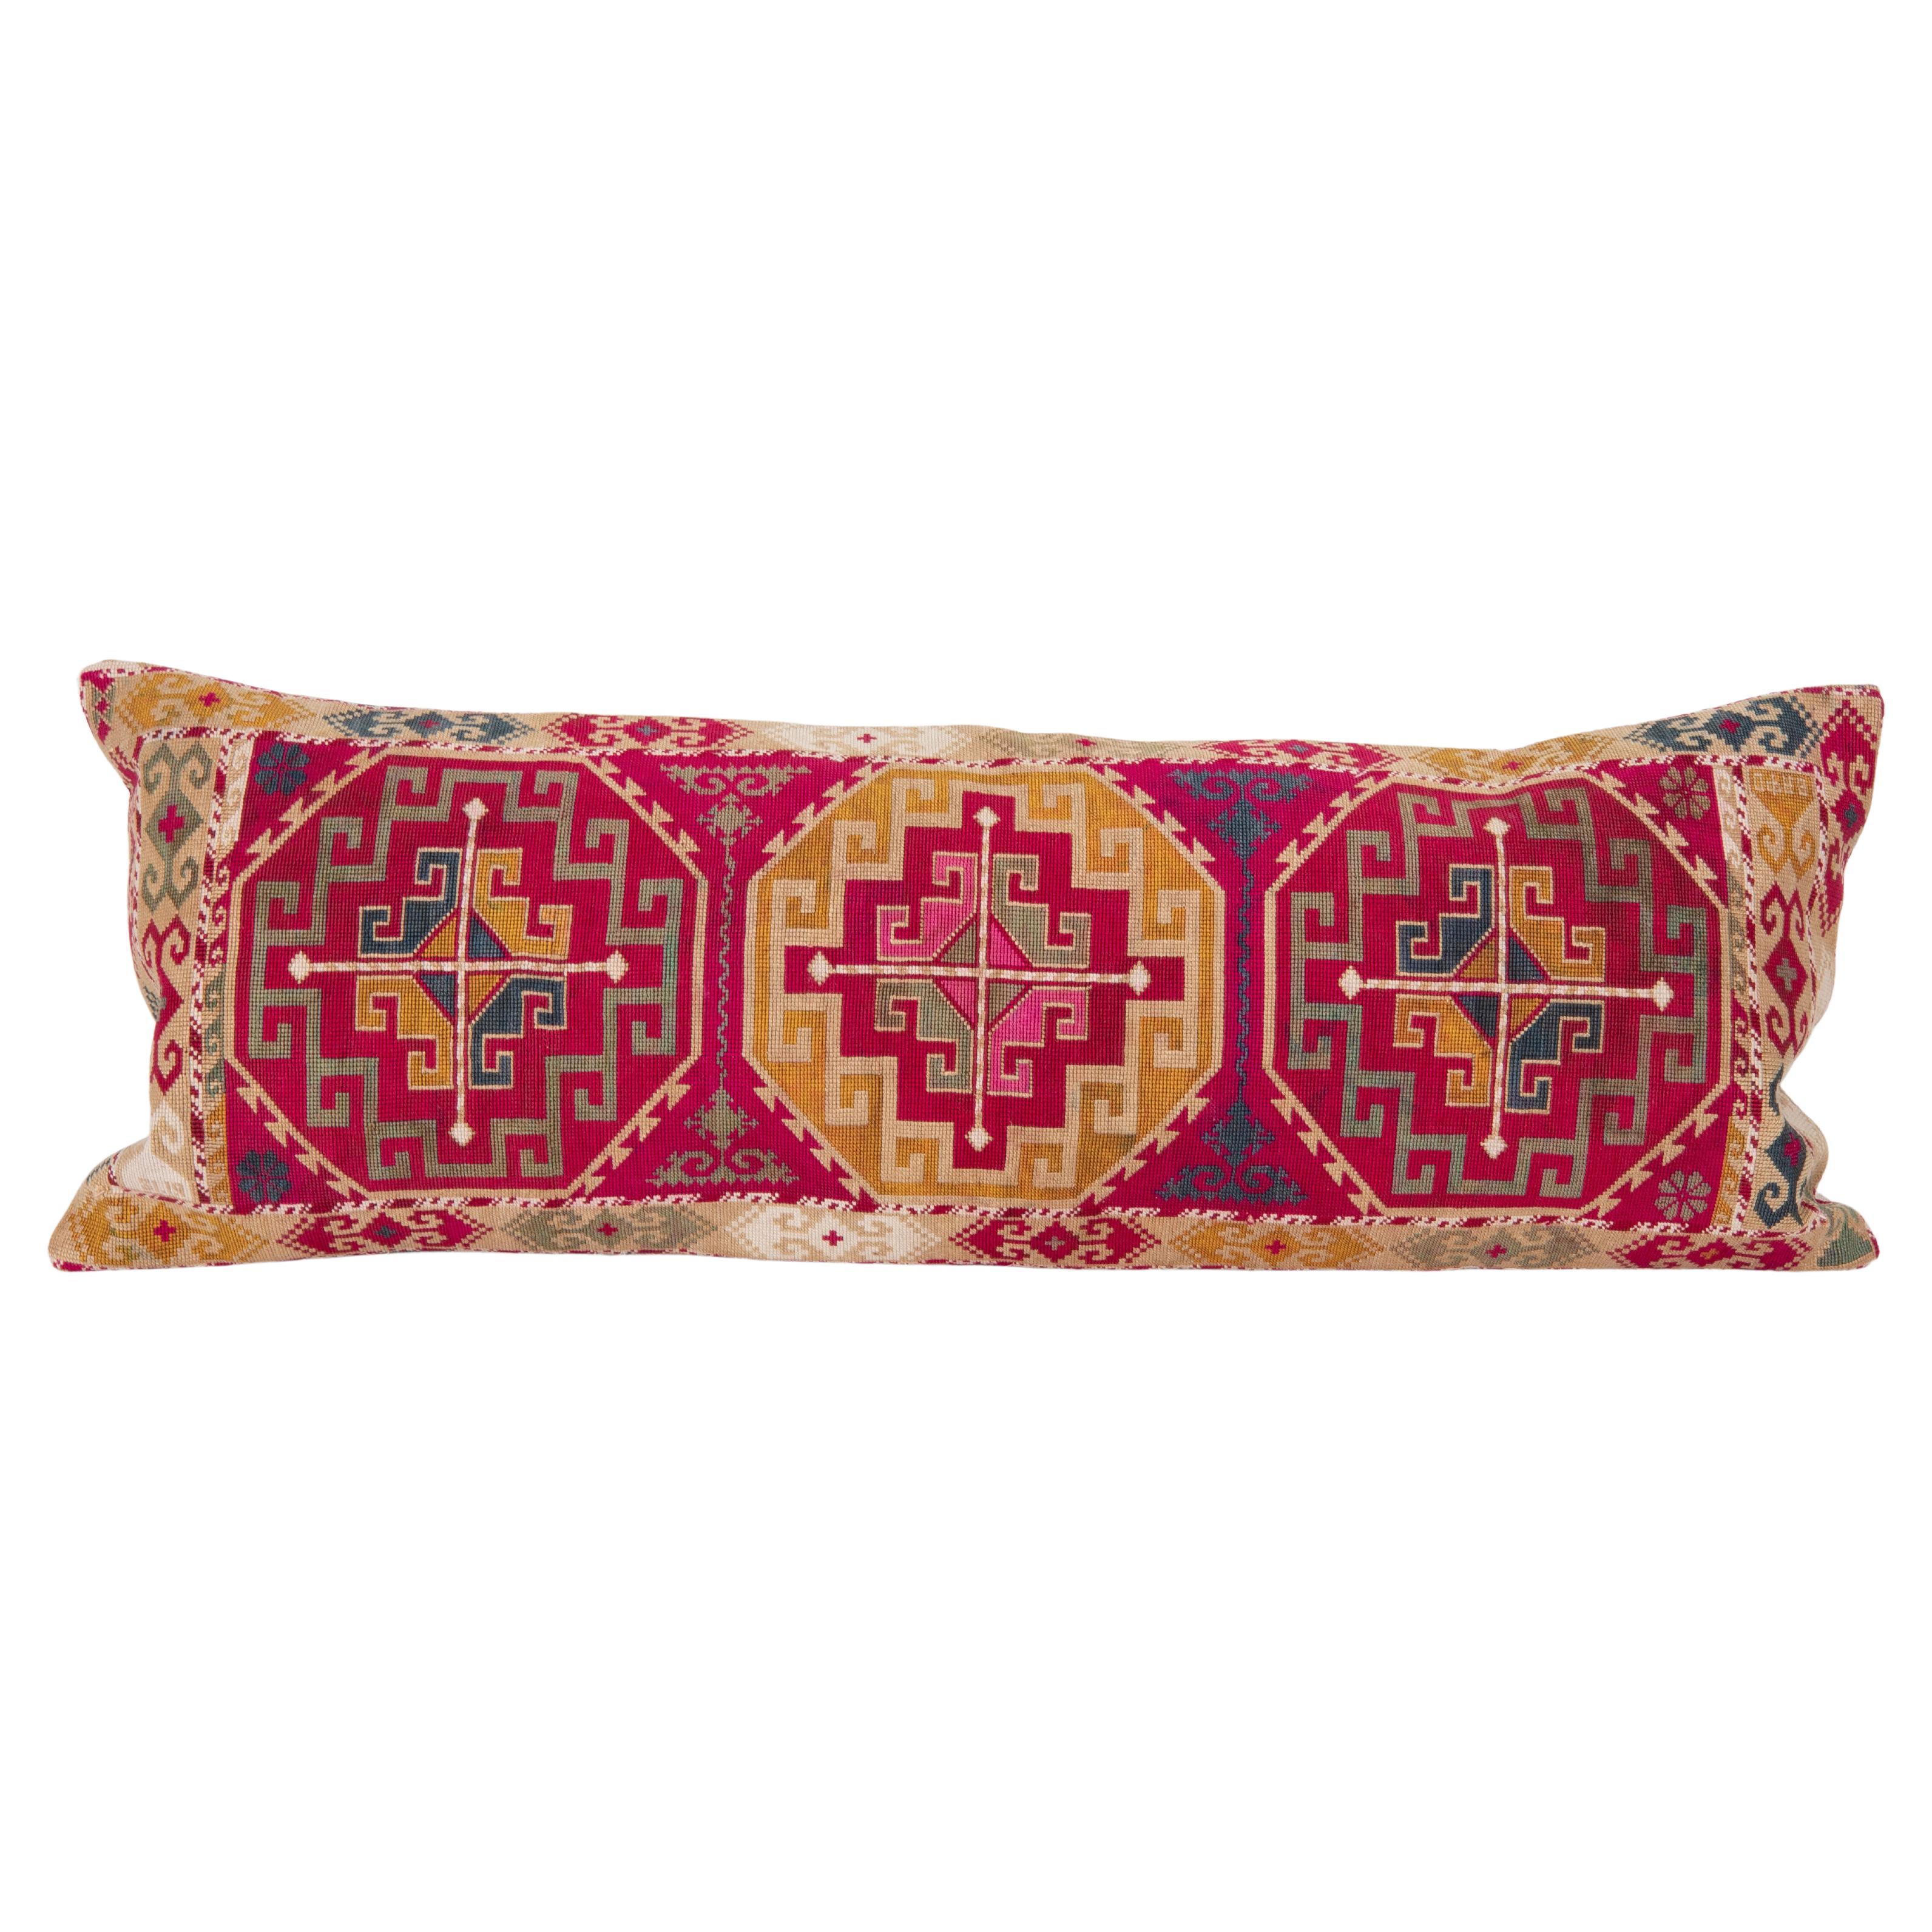 Pillow Cover, Made from a 1970s/80s silk mafrash ( storage bag ) Panel For Sale